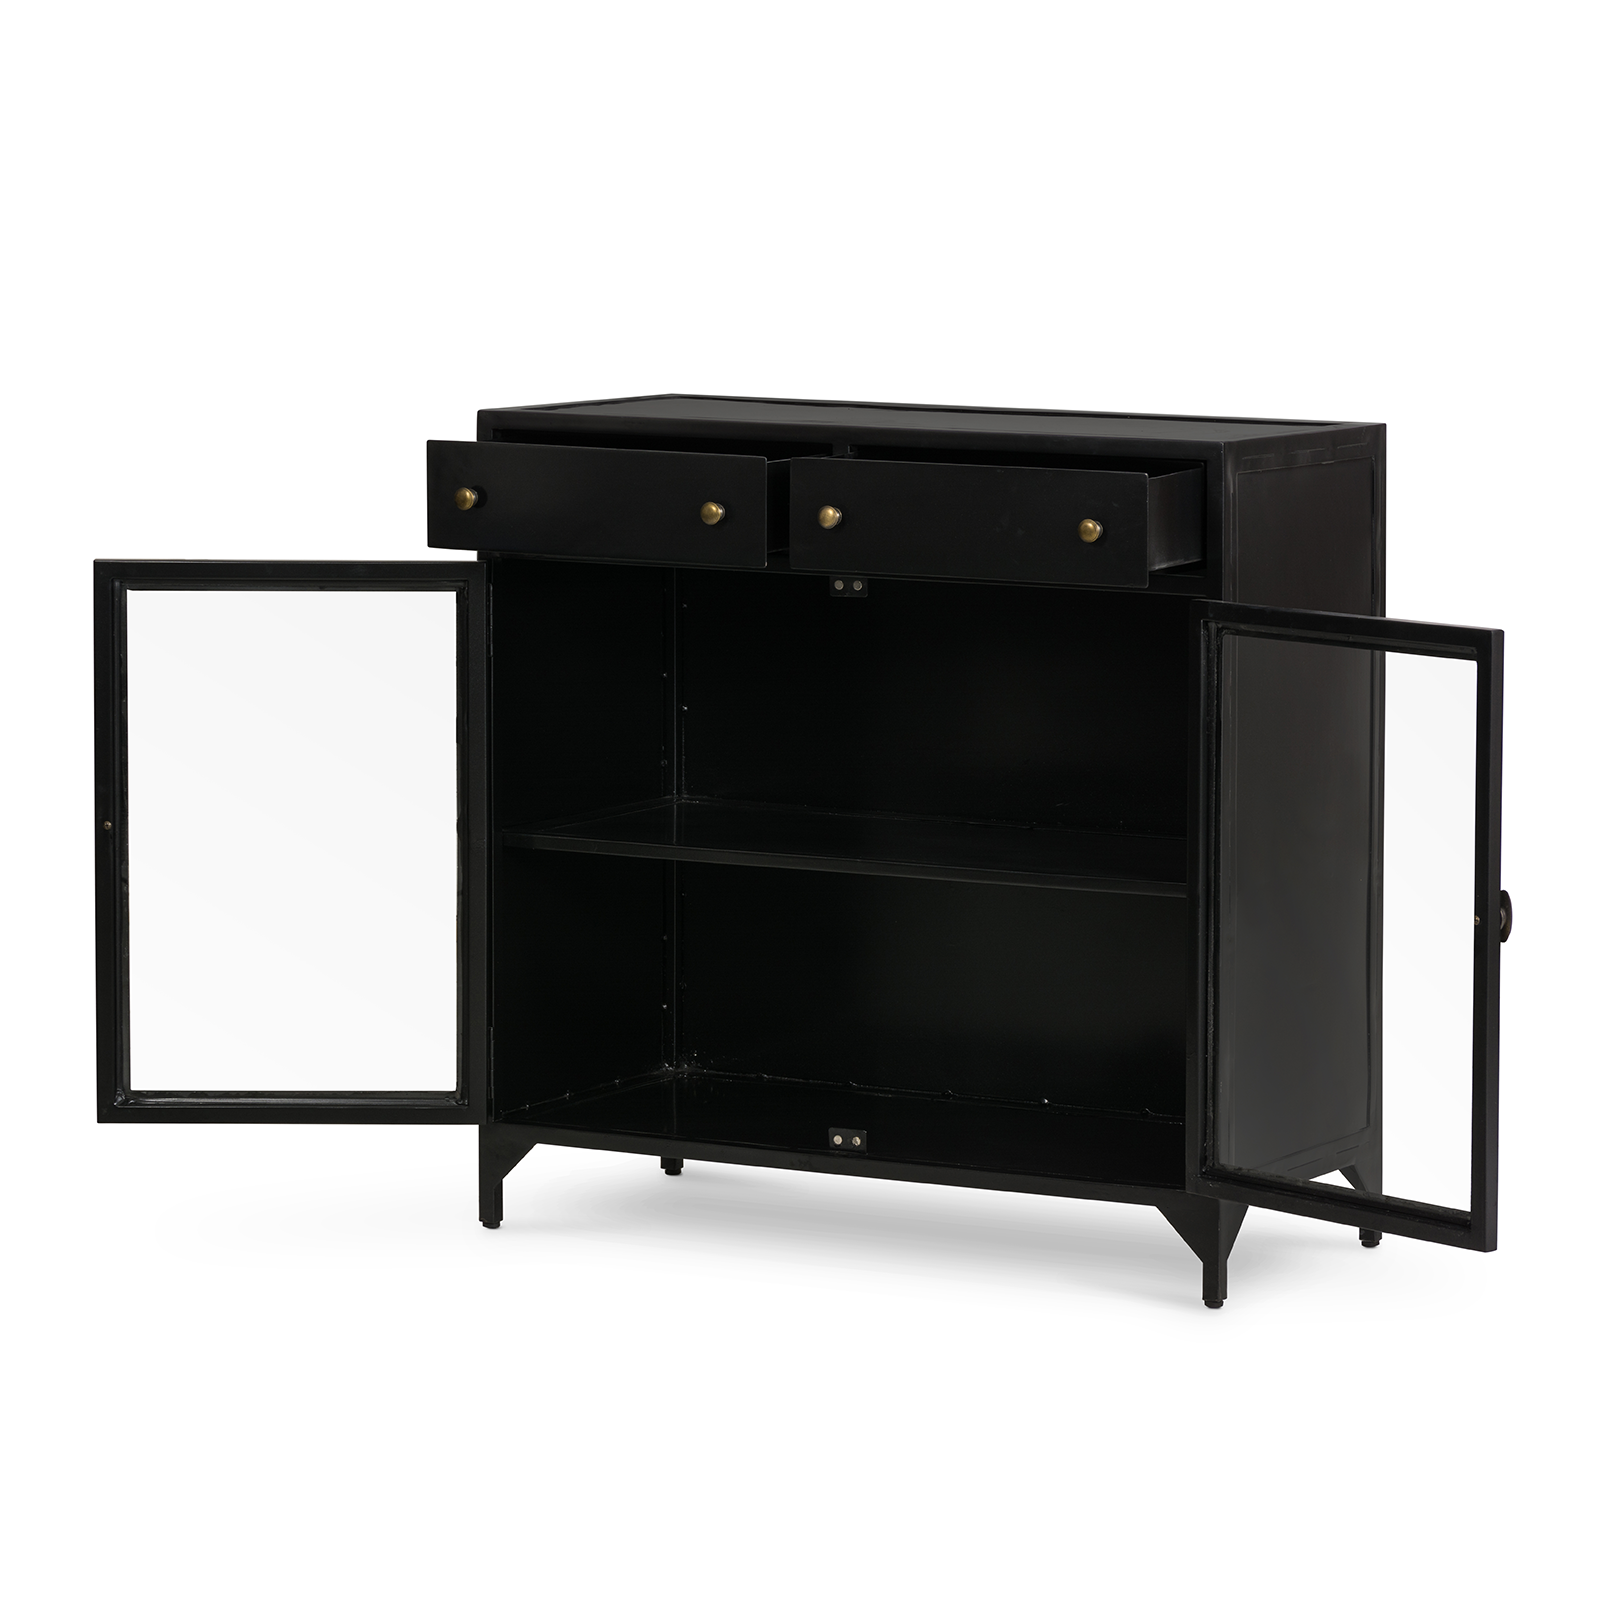 Ansel Small Cabinet